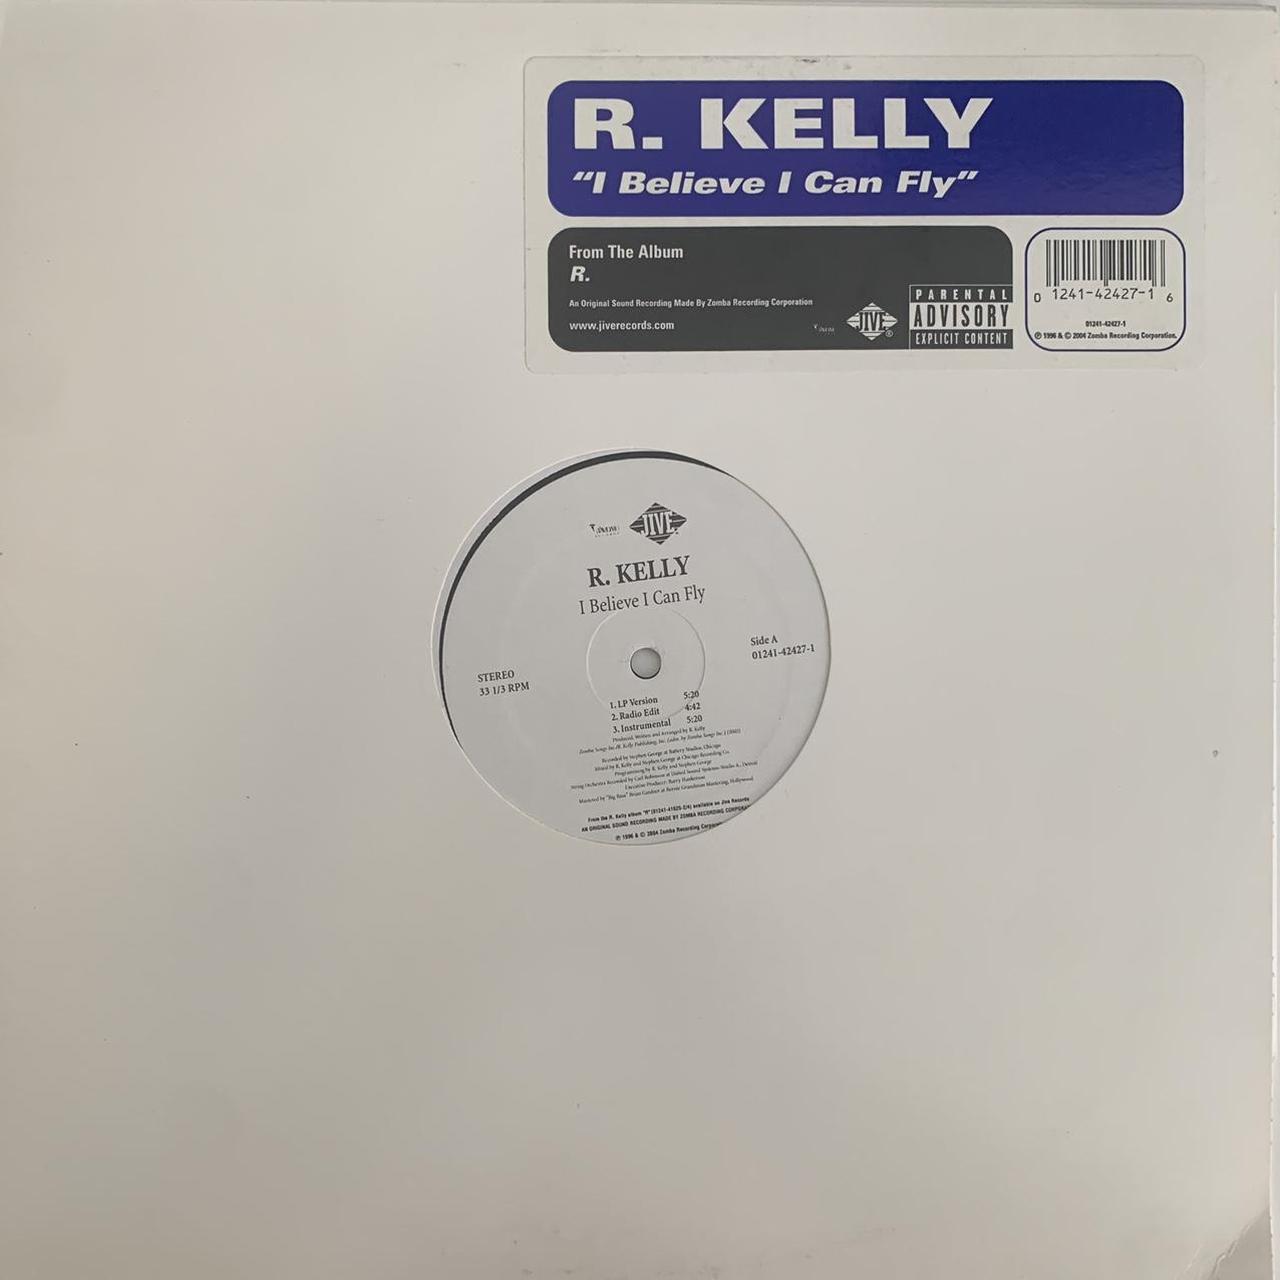 R Kelly “I Believe I Can Fly” / “Religious Love” / “I Can’t Sleep” 5 Track 12inch Vinyl